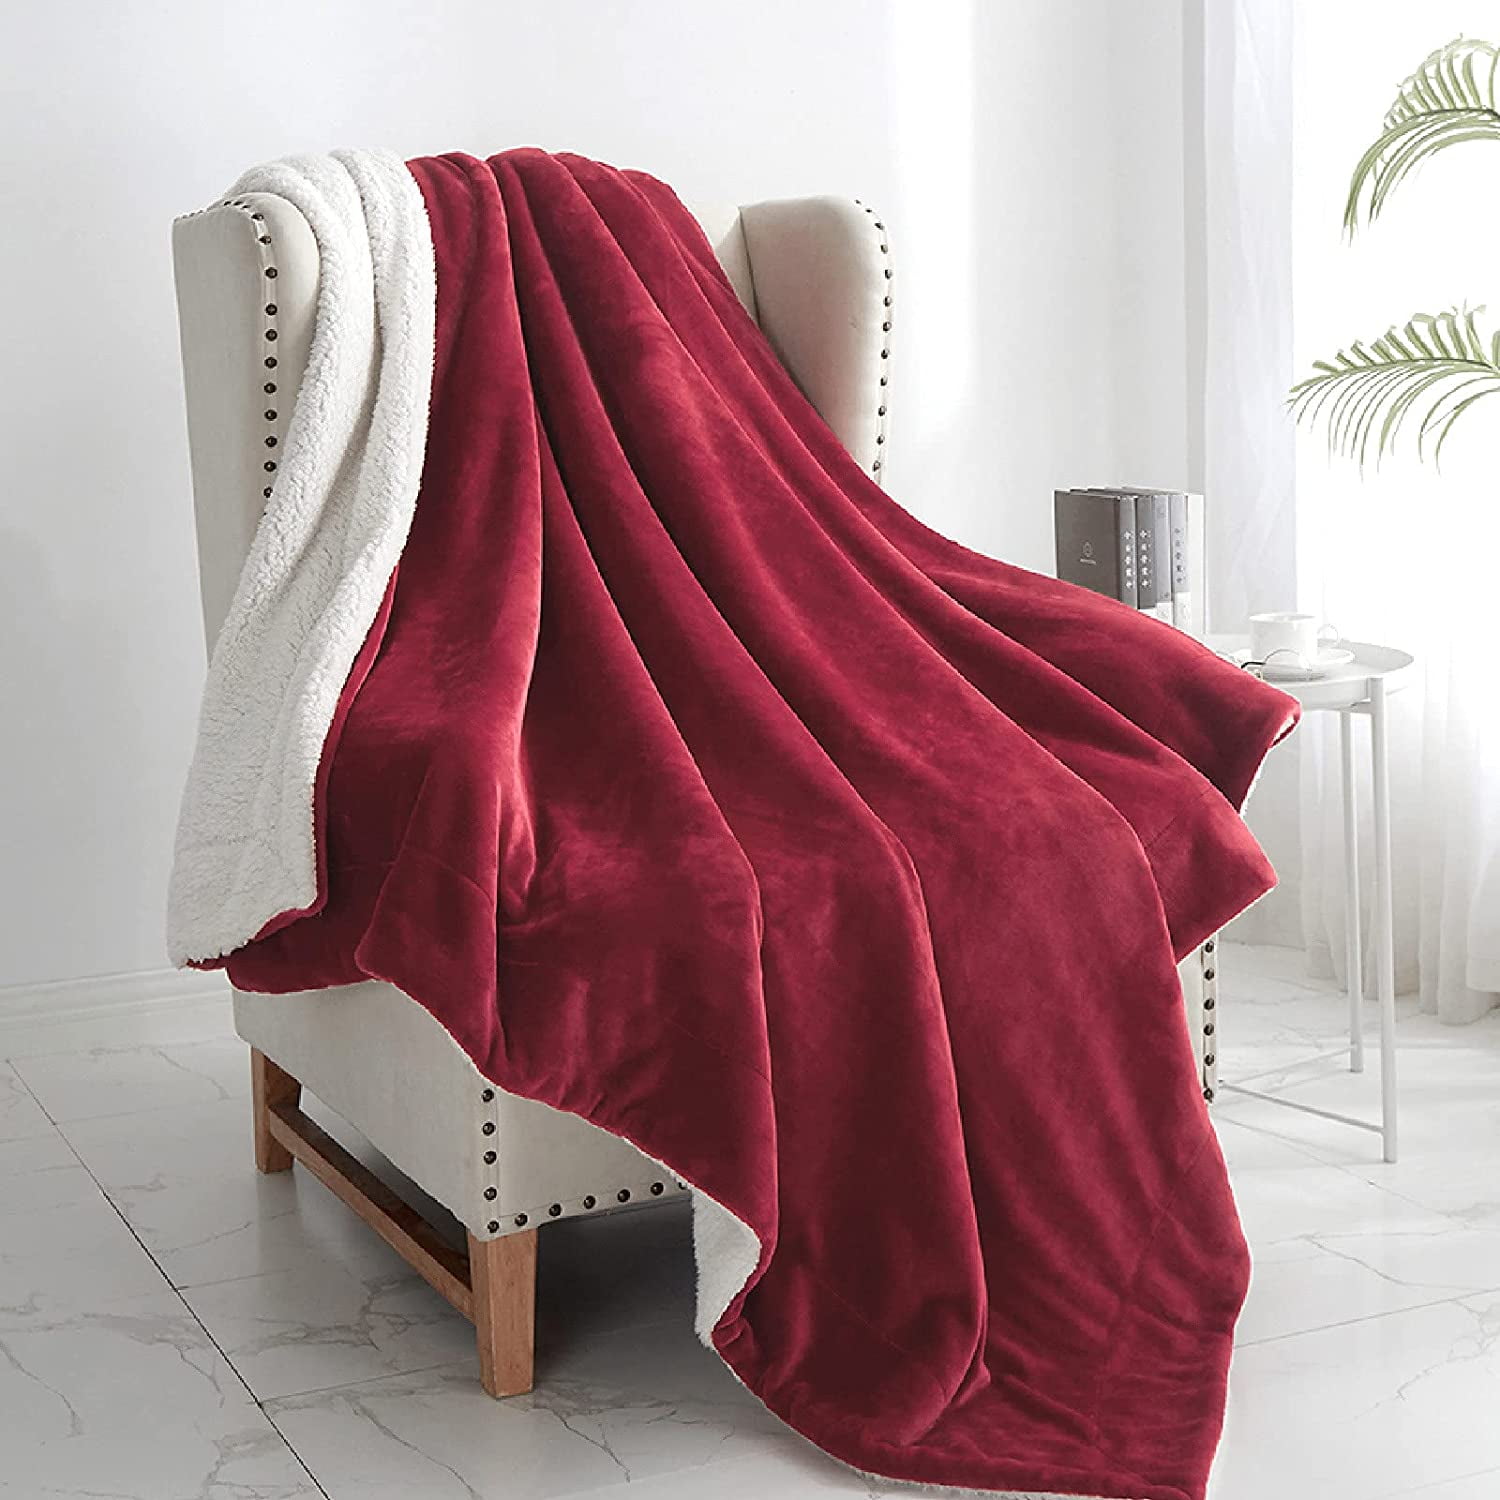 Throw Blanket Red Trunks with Christmas Tree Snow Bed Throws Flannel Fleece Blanket Lightweight All Season Bed Quilts Bedding Carpet Home Decor for Couch Bed Sofa Chair